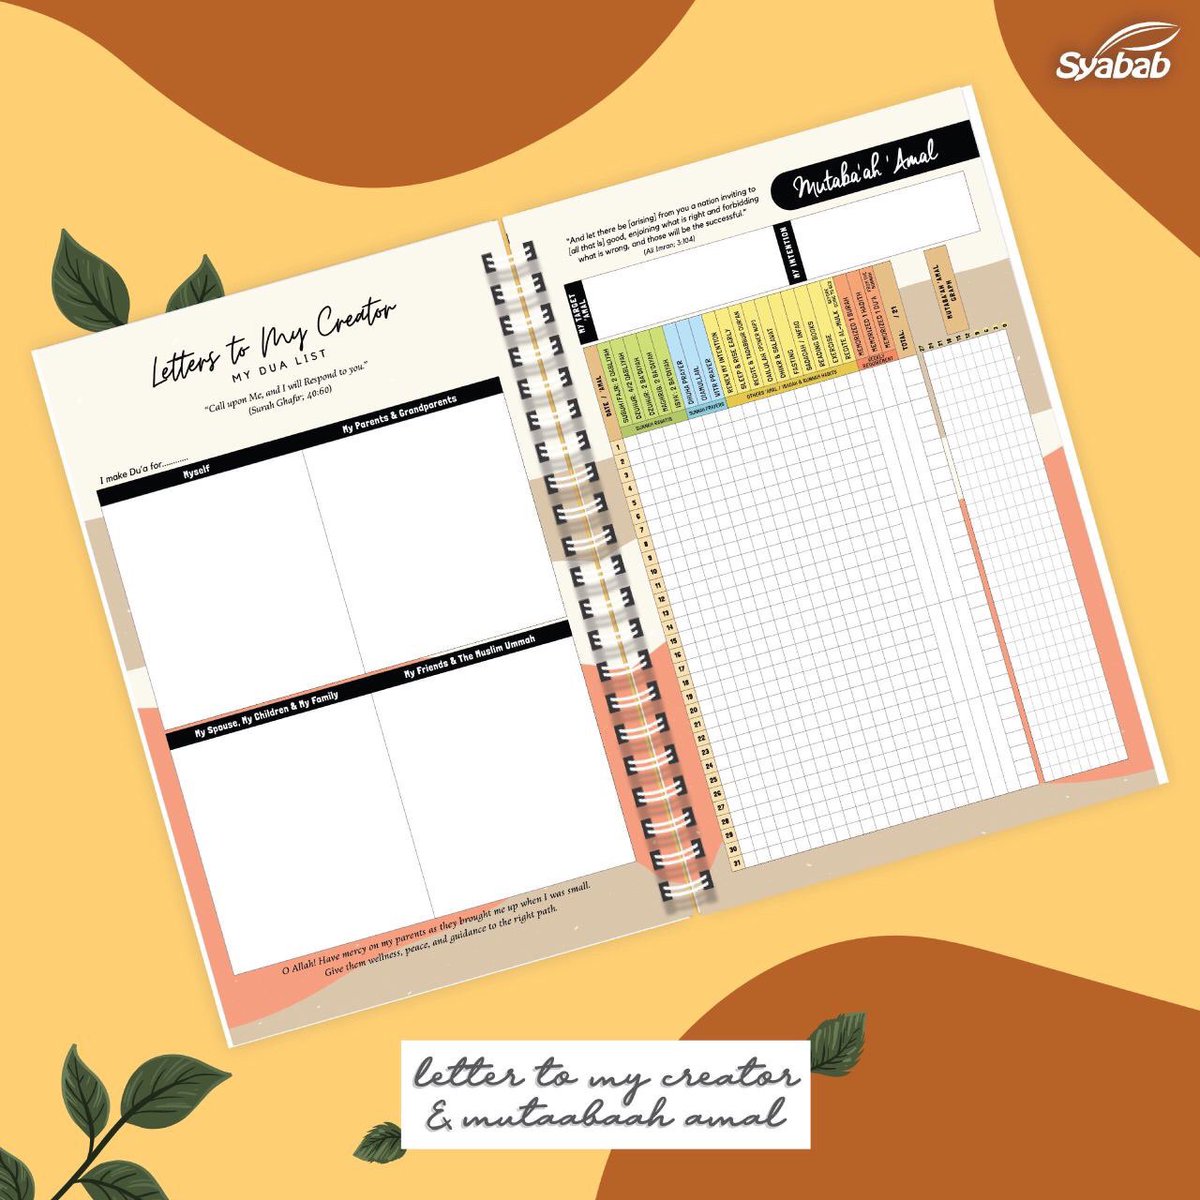 CONTENT EXCLUSIVE PLANNER 2021 Vision board 2021 goals Time to travel Time to exercise Checklist Khatam quran Yearly reading log Blank pages 40+ Calendar 2021 Calendar Hijri (1442H-1443H) Monthly plan Weekly & daily plan Mutabaah amal